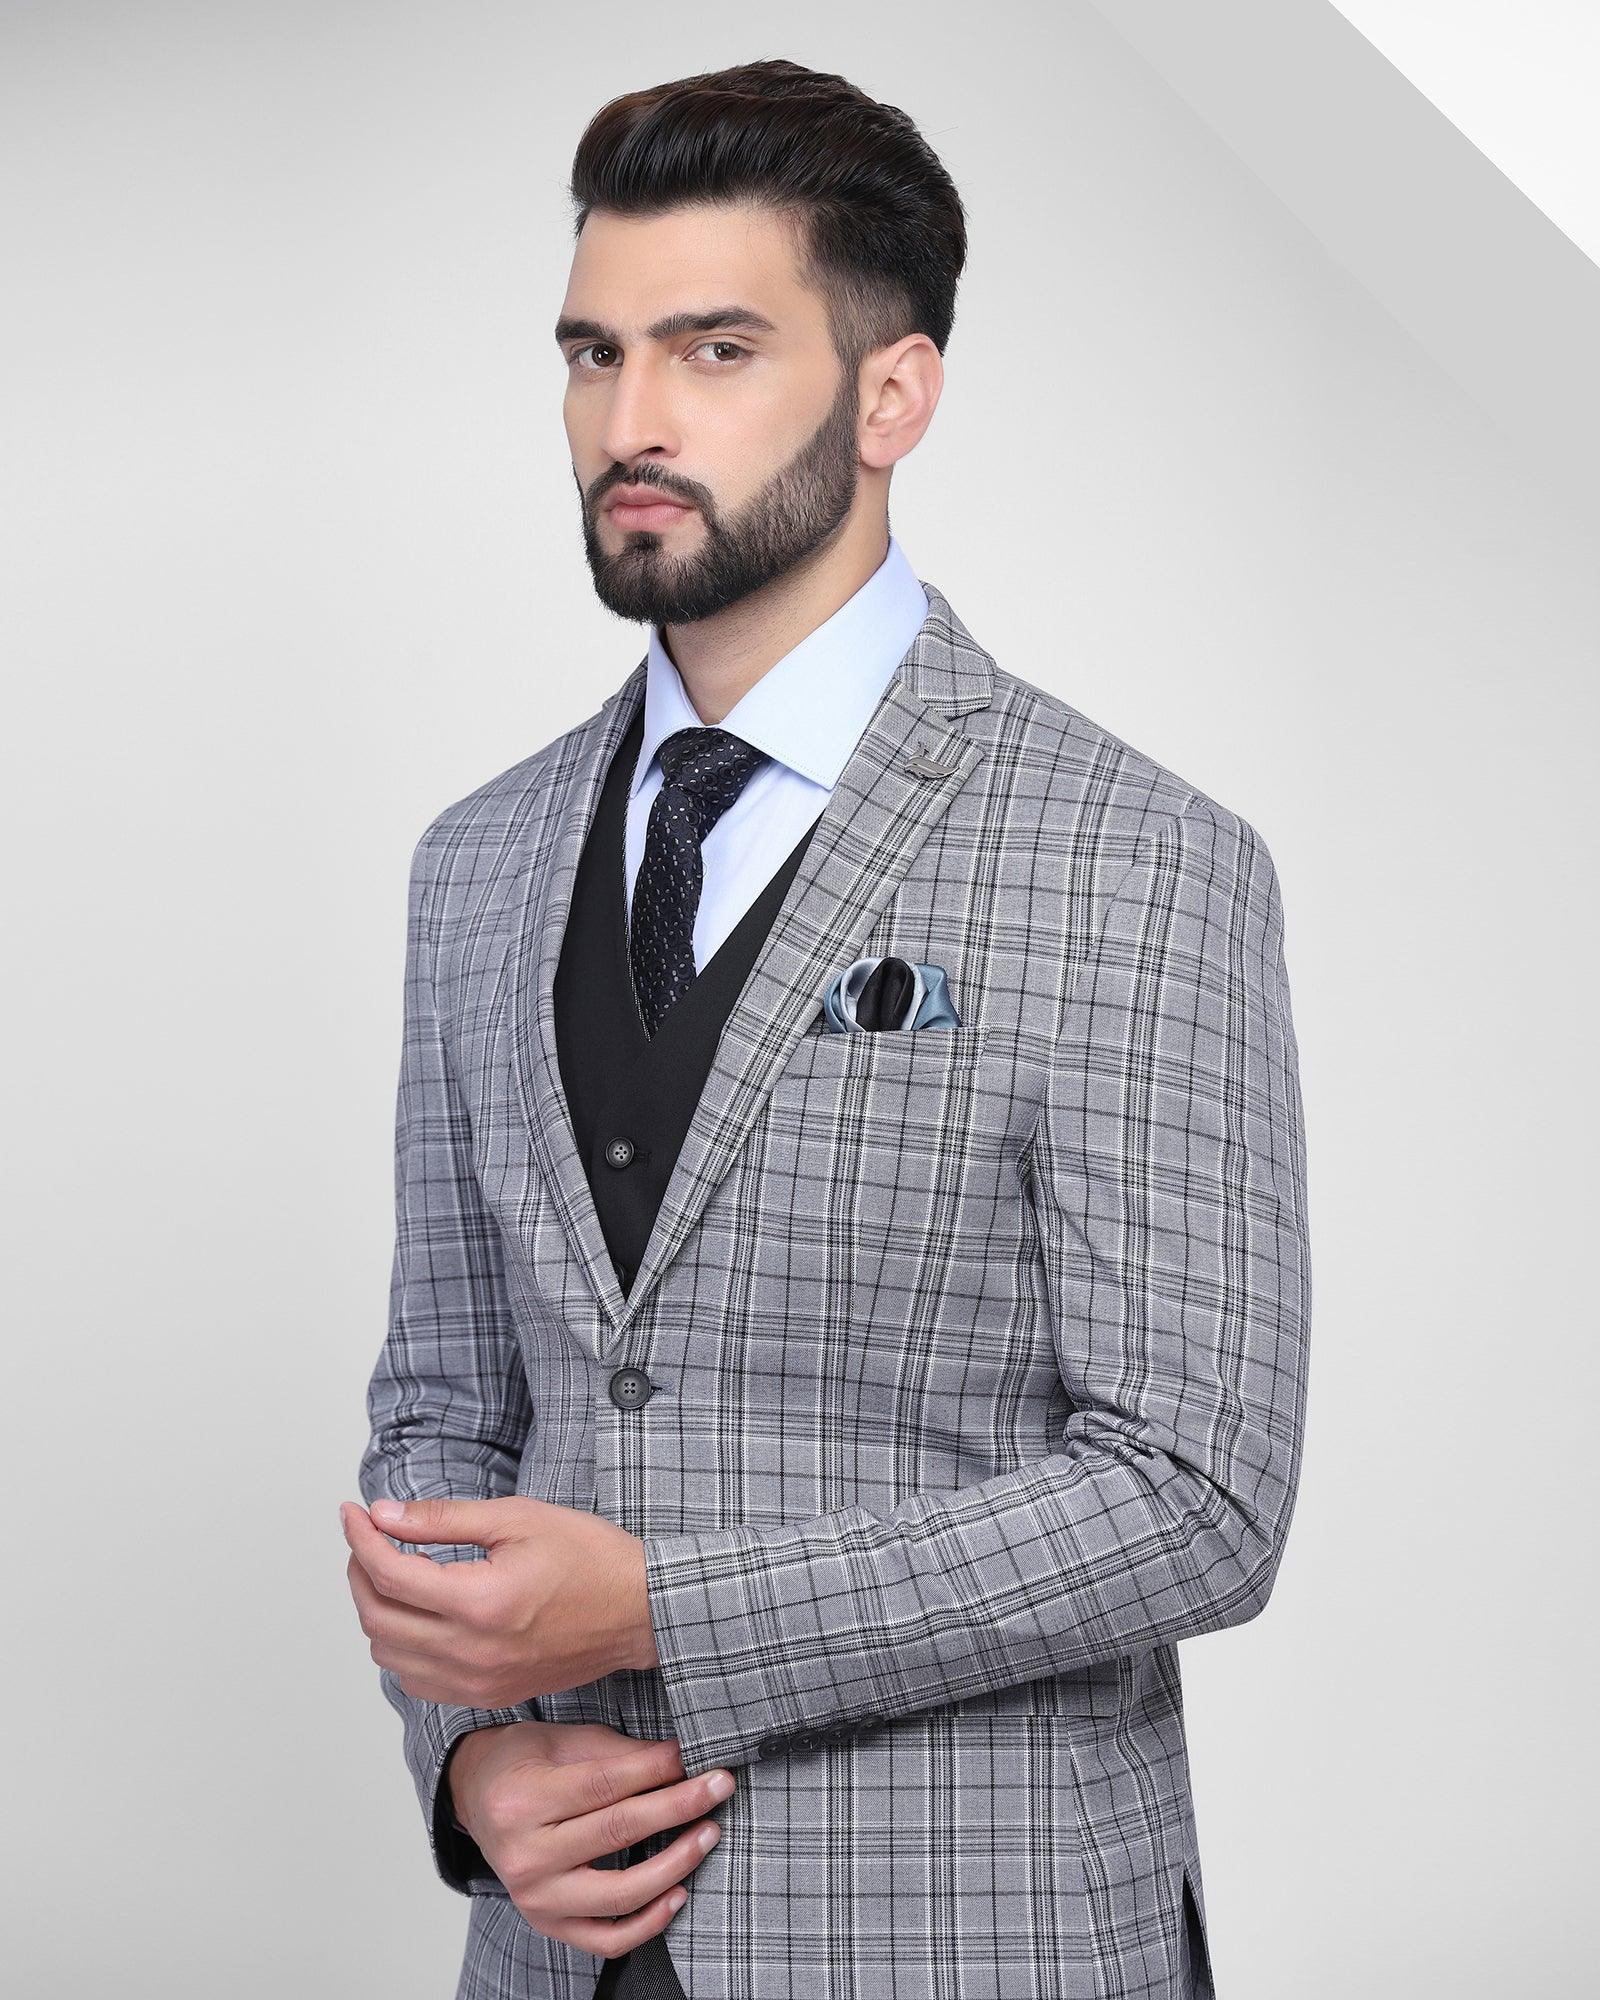 Retro Design Mens Grey Check Suit Slim Fit 7XL Jacket, Vest, And Pants For  Business, Weddings, Groomsmen, Or Casual Wear Boutique Lattice Design Size  220909 From Kong01, $72.63 | DHgate.Com